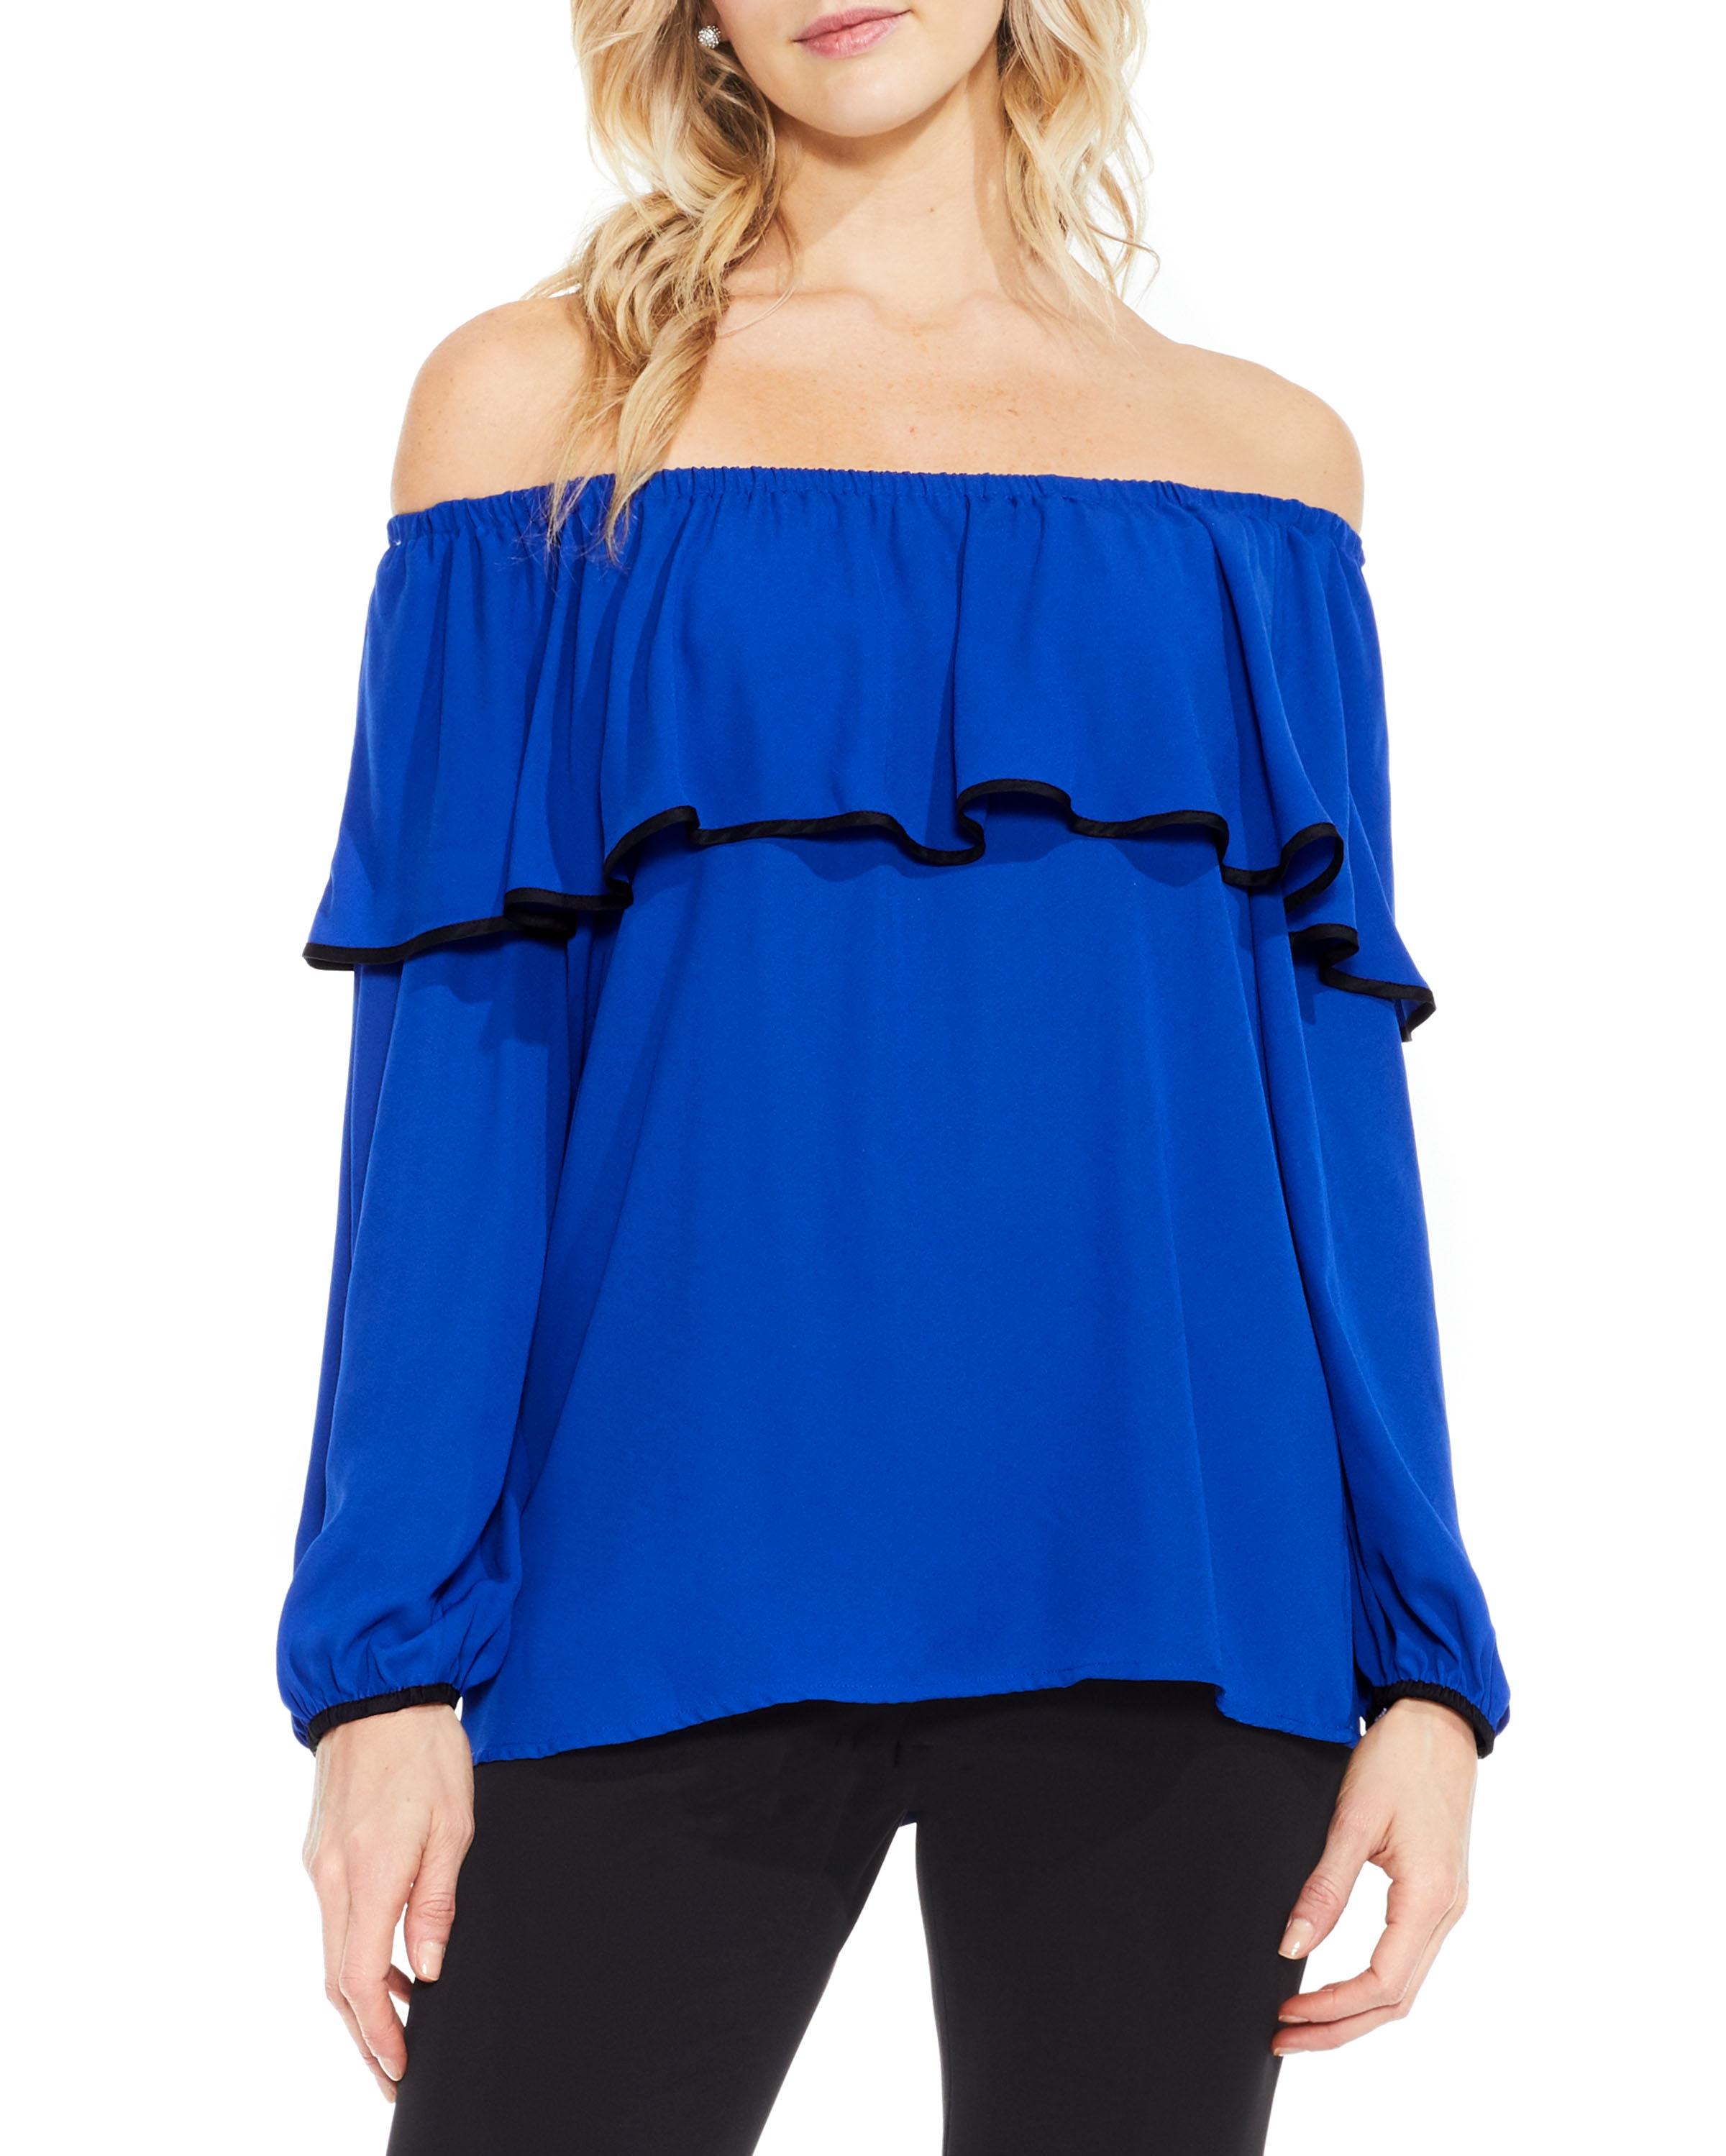 Lyst - Vince Camuto Ruffled Off-the-shoulder Blouse in Blue